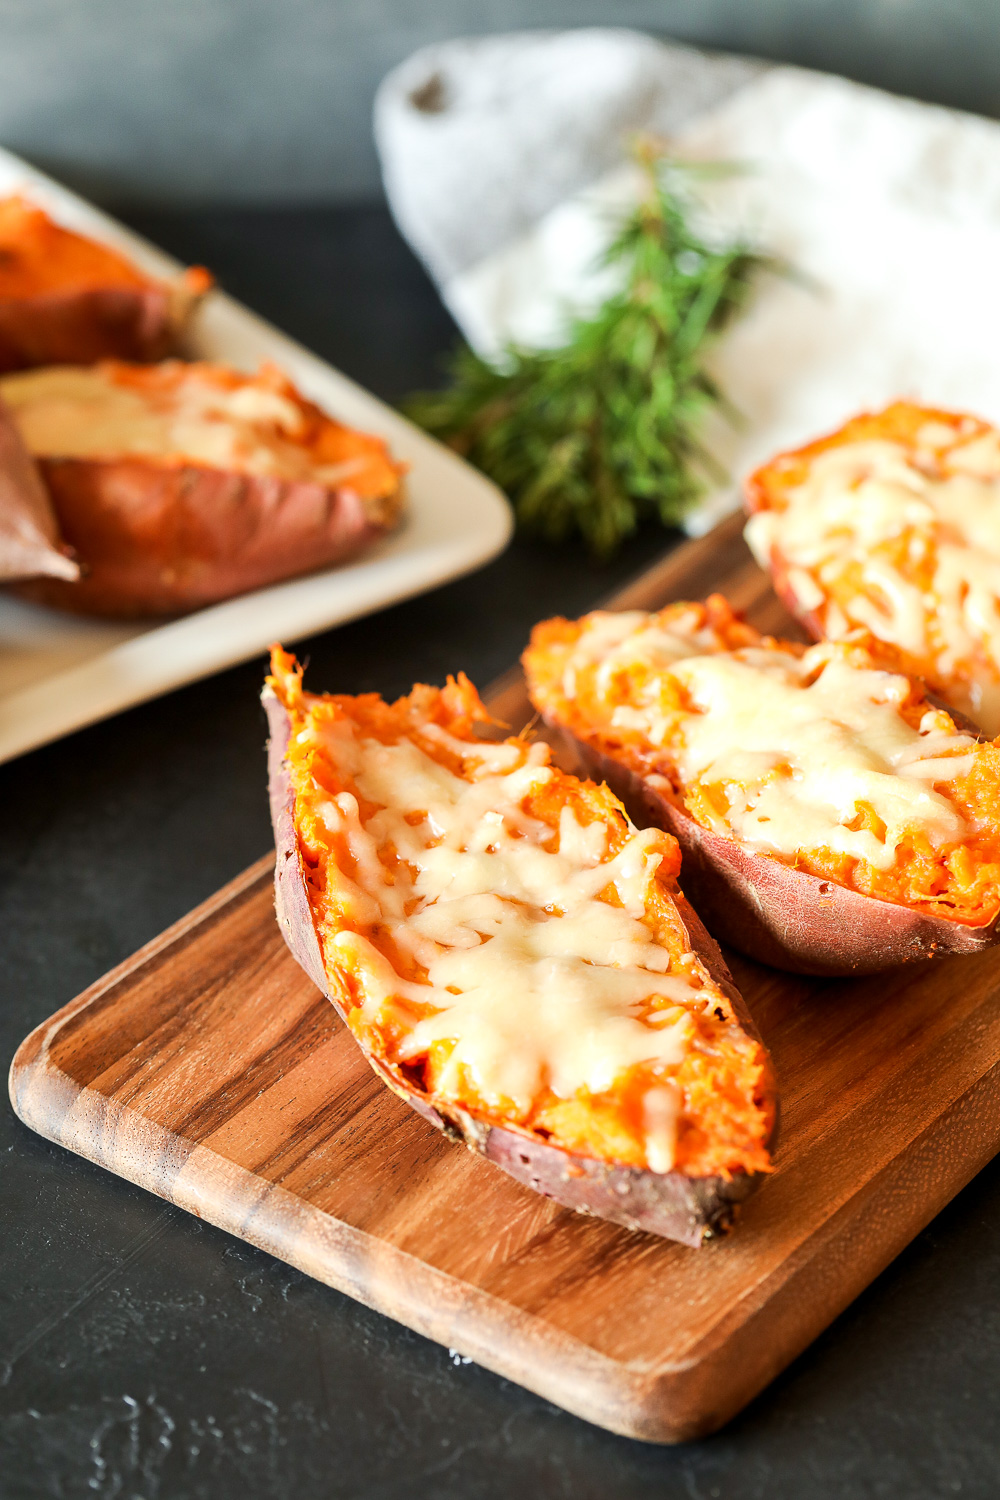 These Rosemary Bacon Twice Baked Sweet Potatoes are easy to make and so delicious!